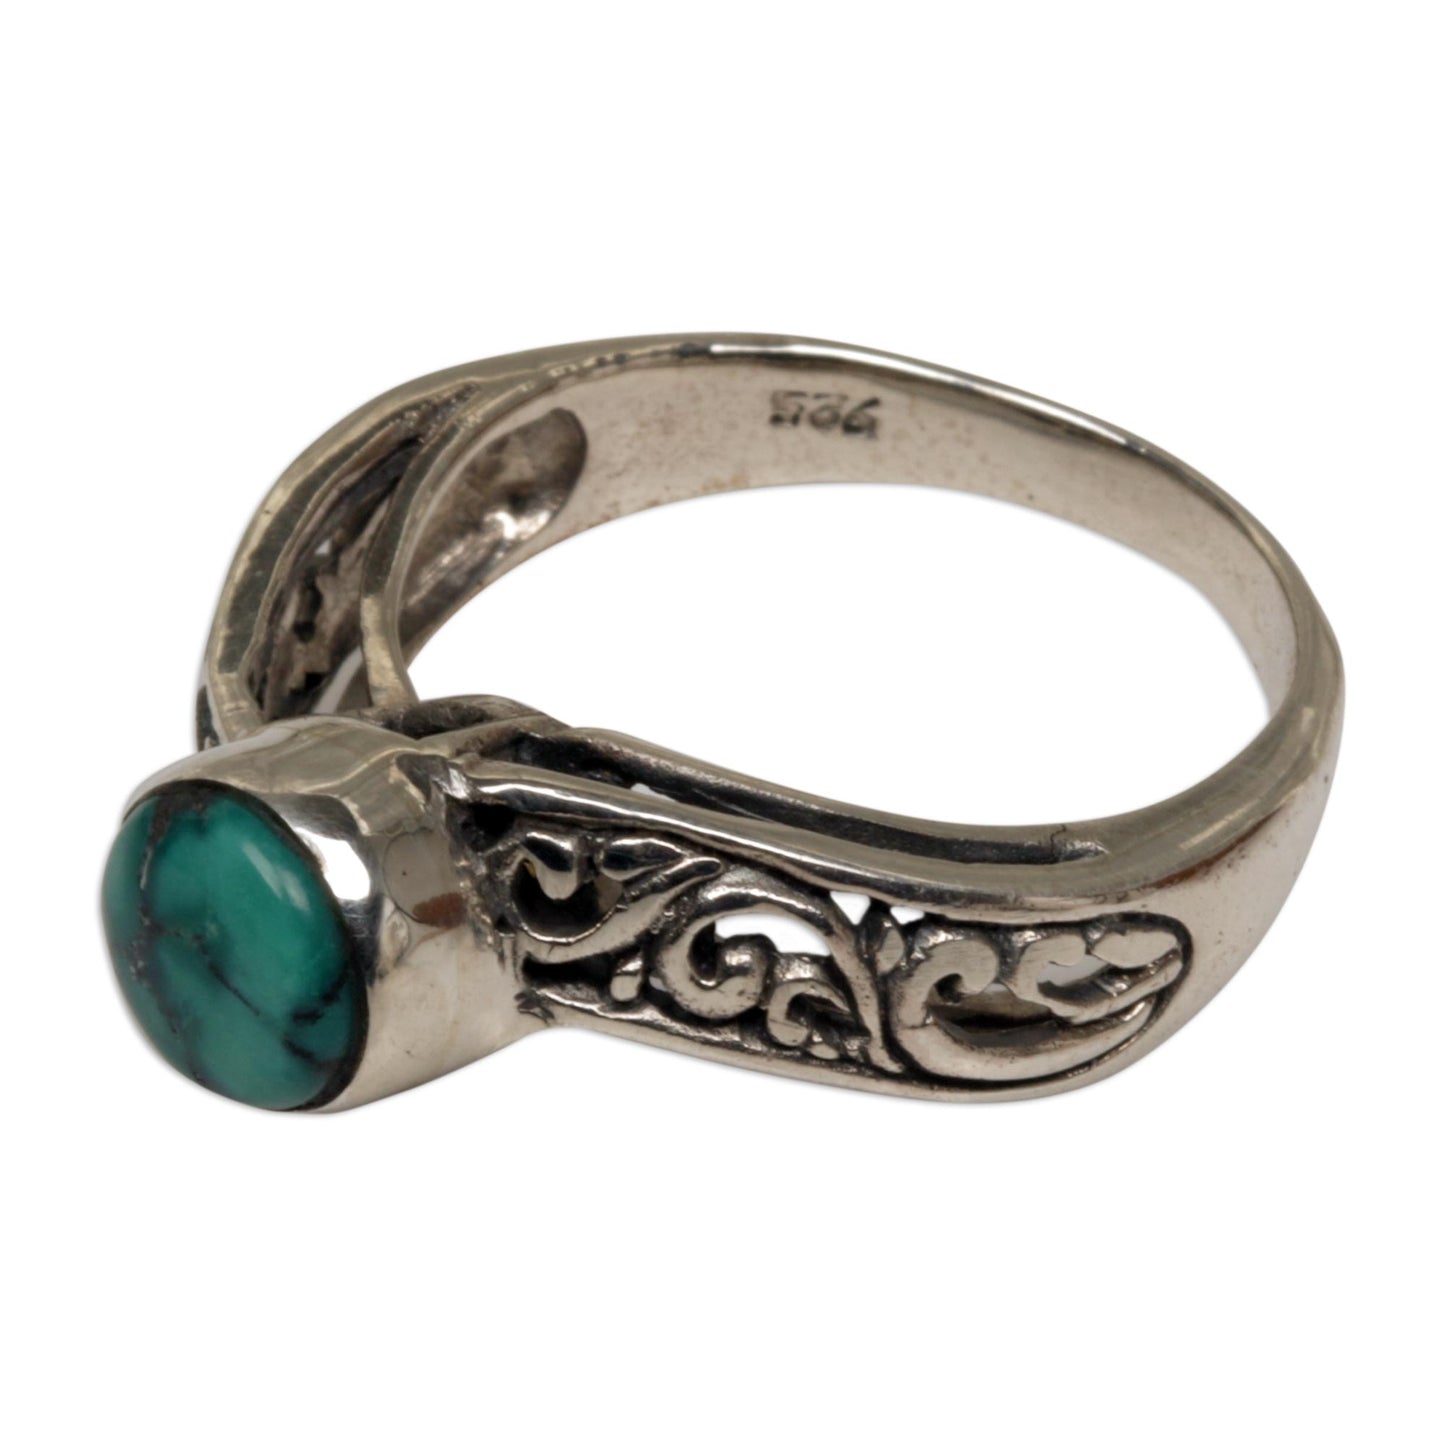 Bali Vines Reconstituted Turquoise Single Stone Ring from Indonesia